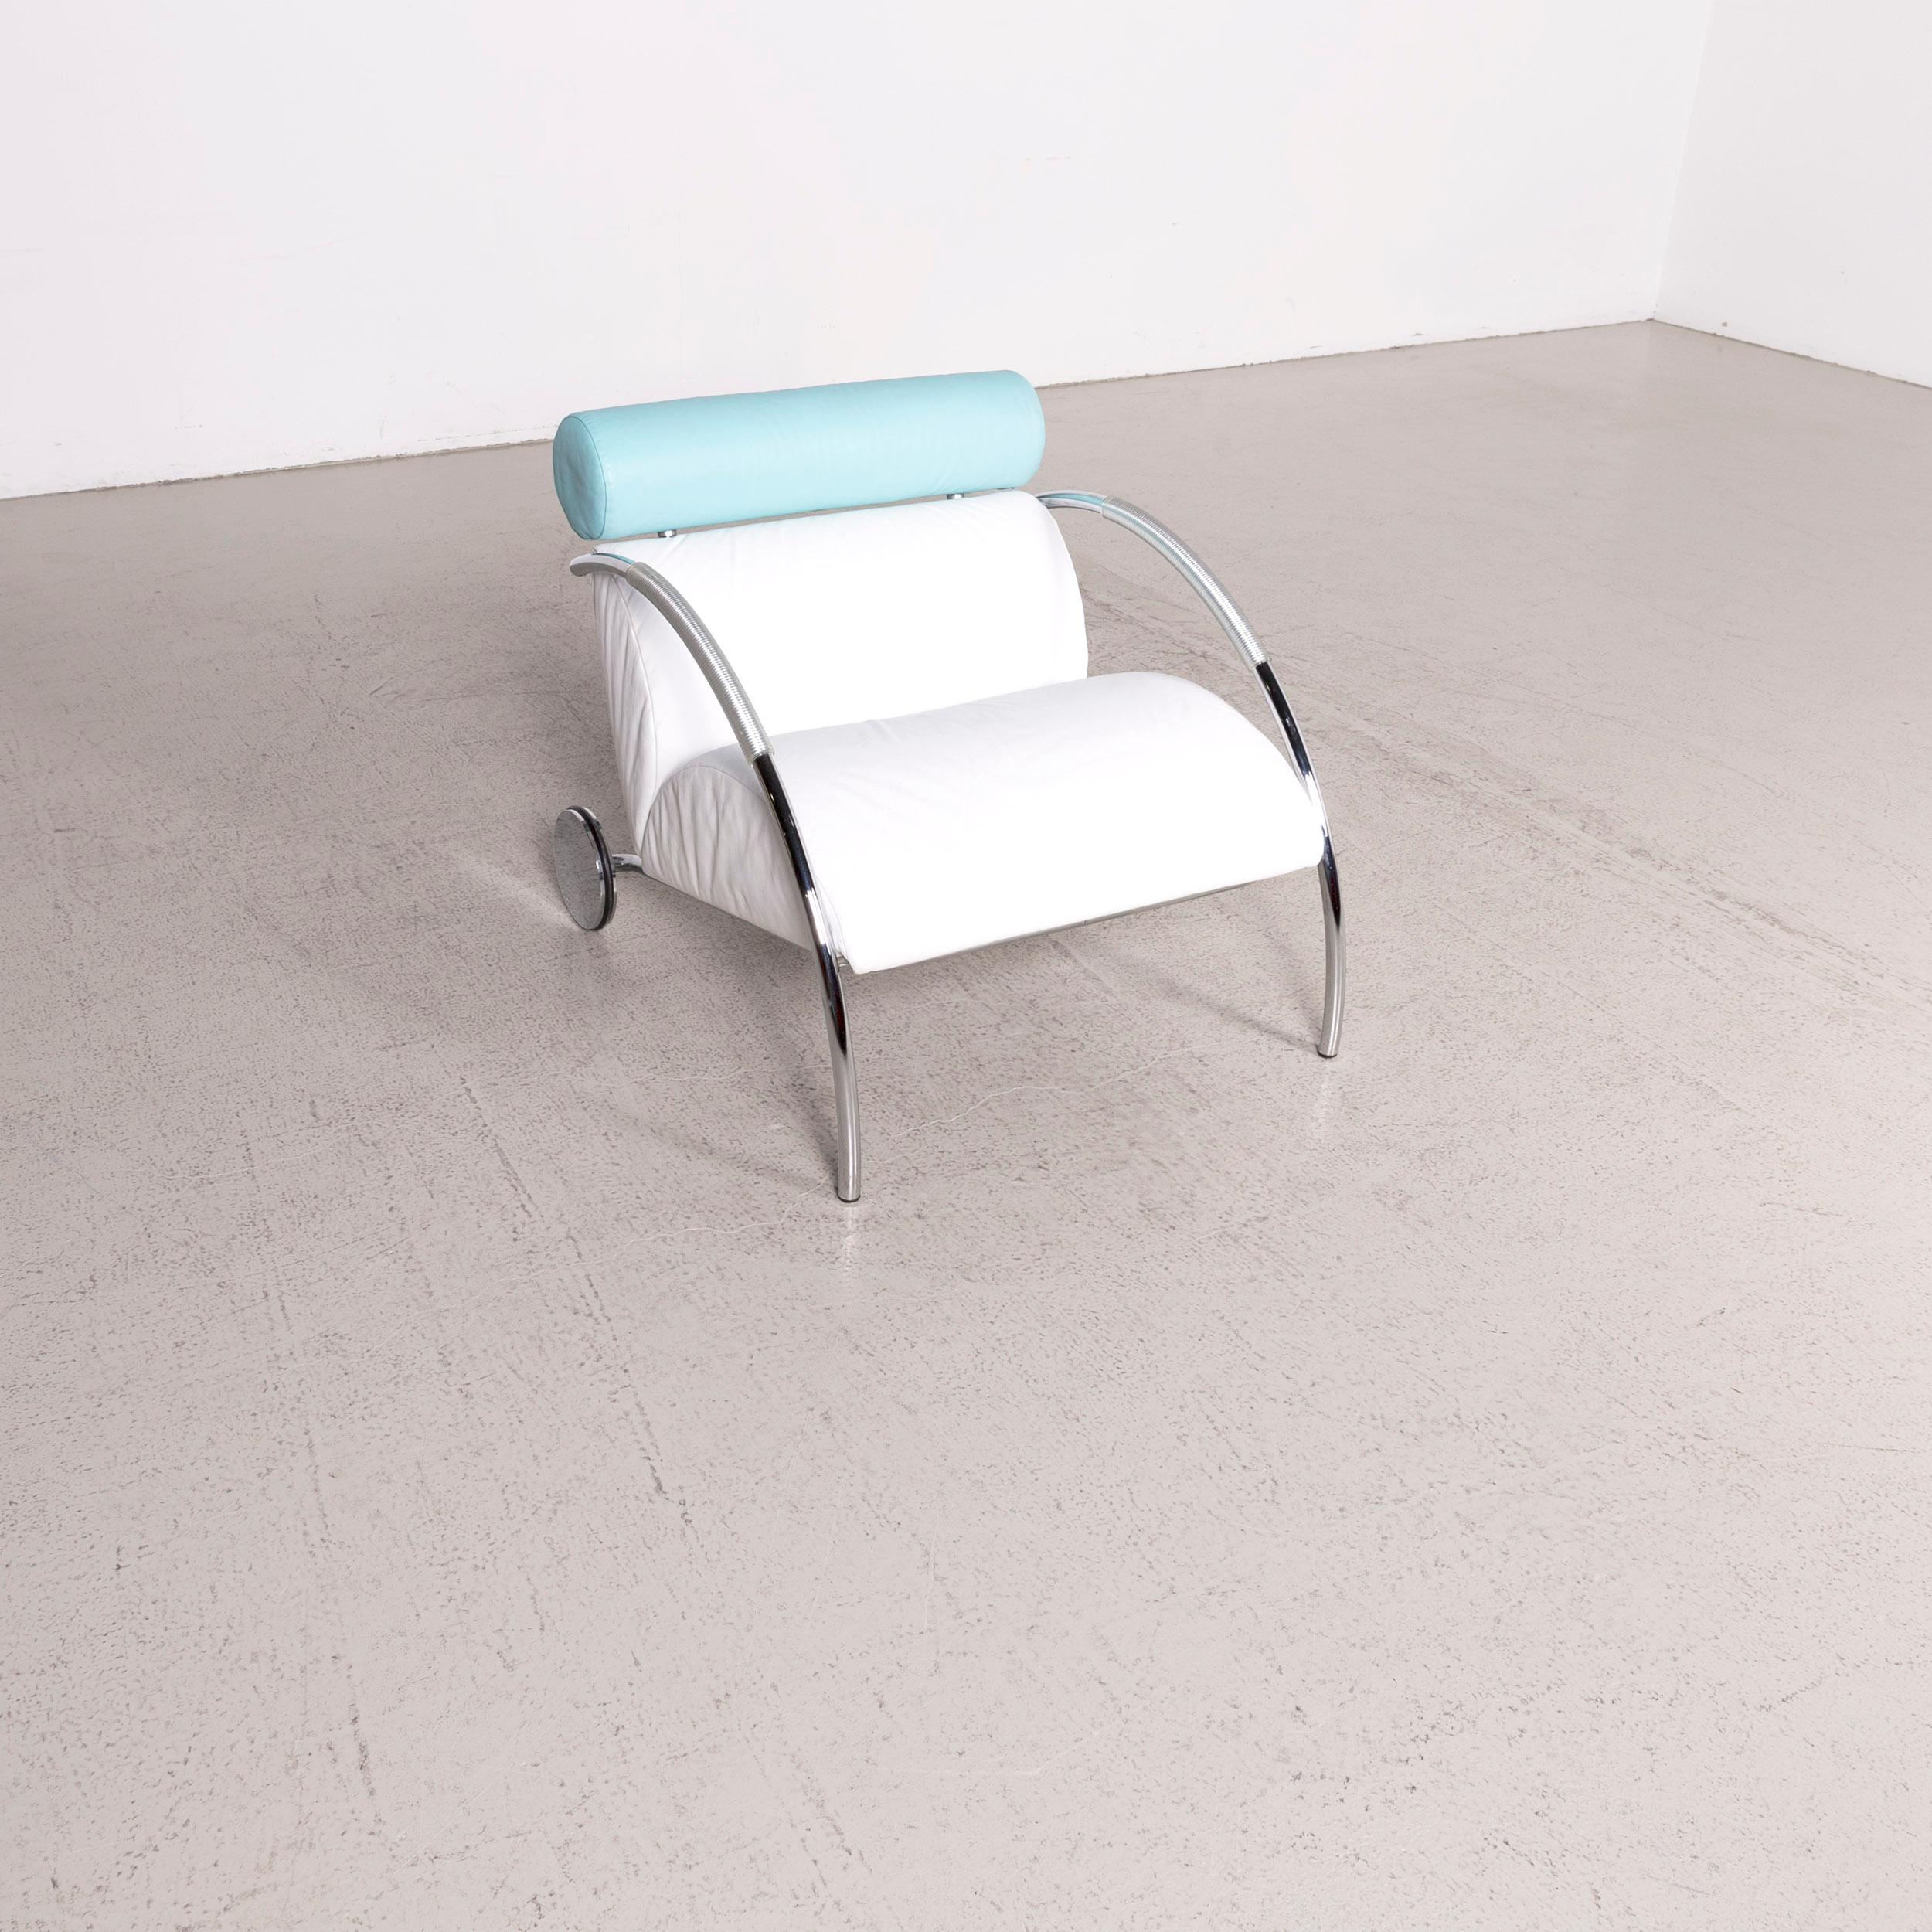 We bring to you a COR cycle designer leather armchair set white blue by Peter Maly genuine.

Product measurements in centimeters:

Depth 90
Width 75
Height 75
Seat-height 45
Rest-height 60
Seat-depth 55
Seat-width 65
Back-height 45.
 